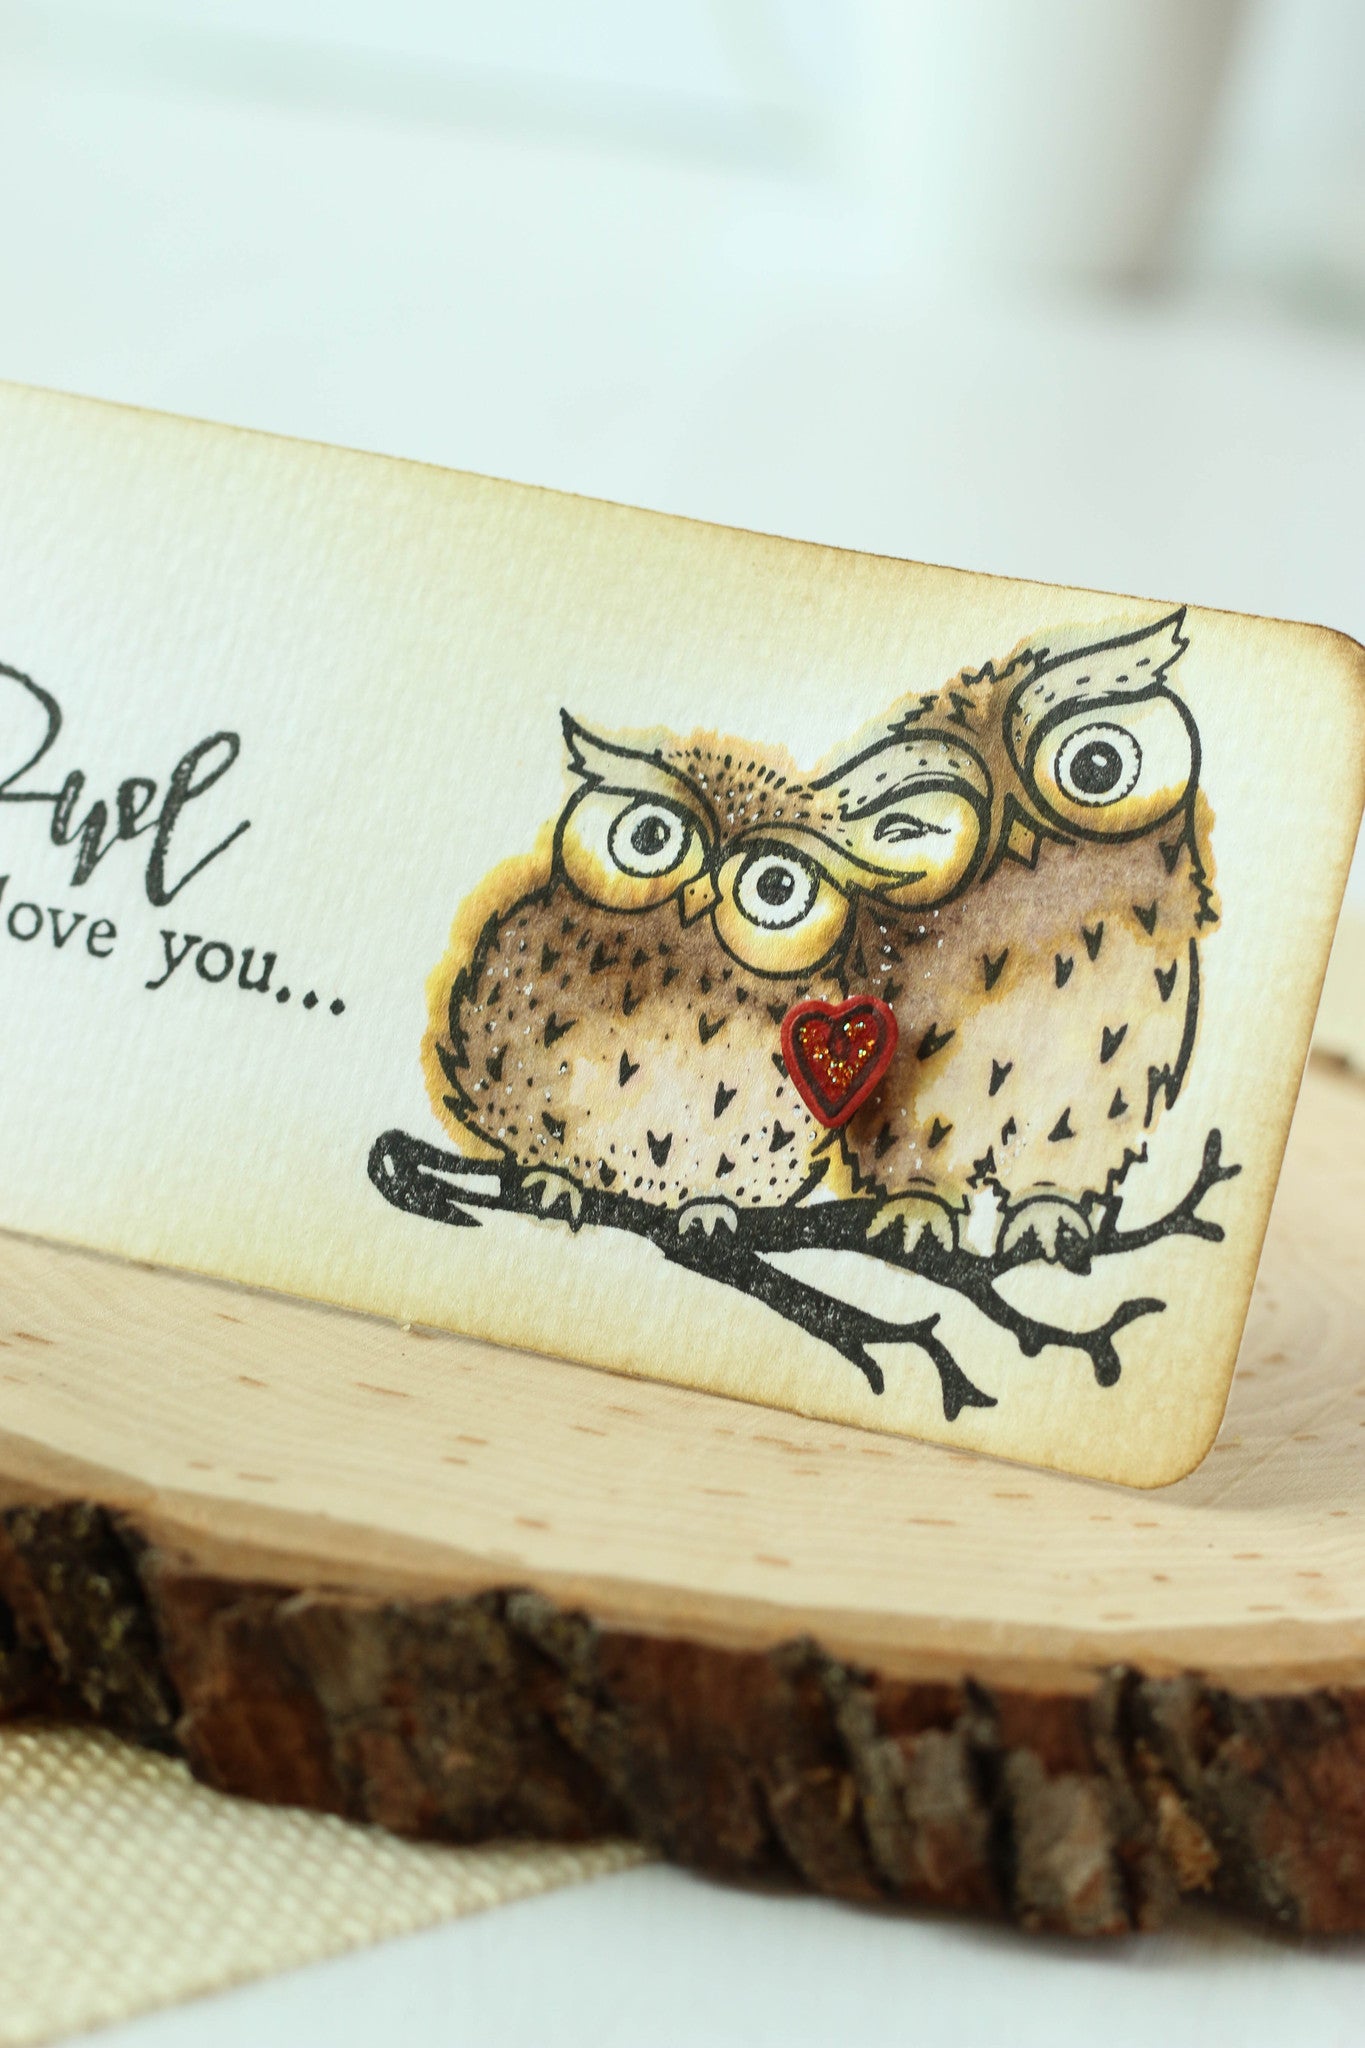 "Owl Always Love You" Watercolored Tag